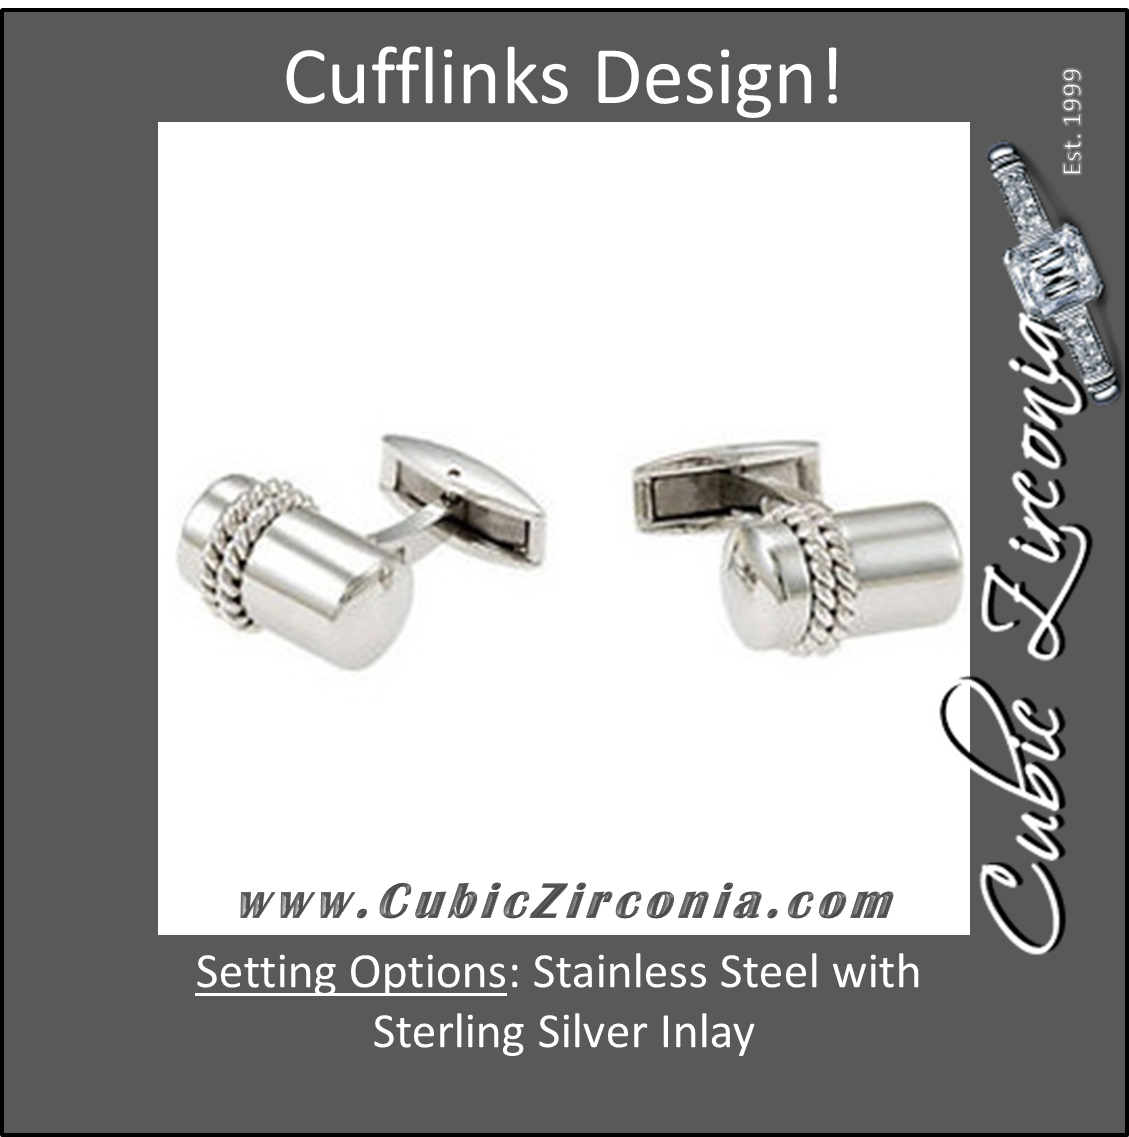 Men’s Cufflinks- Stainless Steel with Sterling Silver Braided Rope Inlay